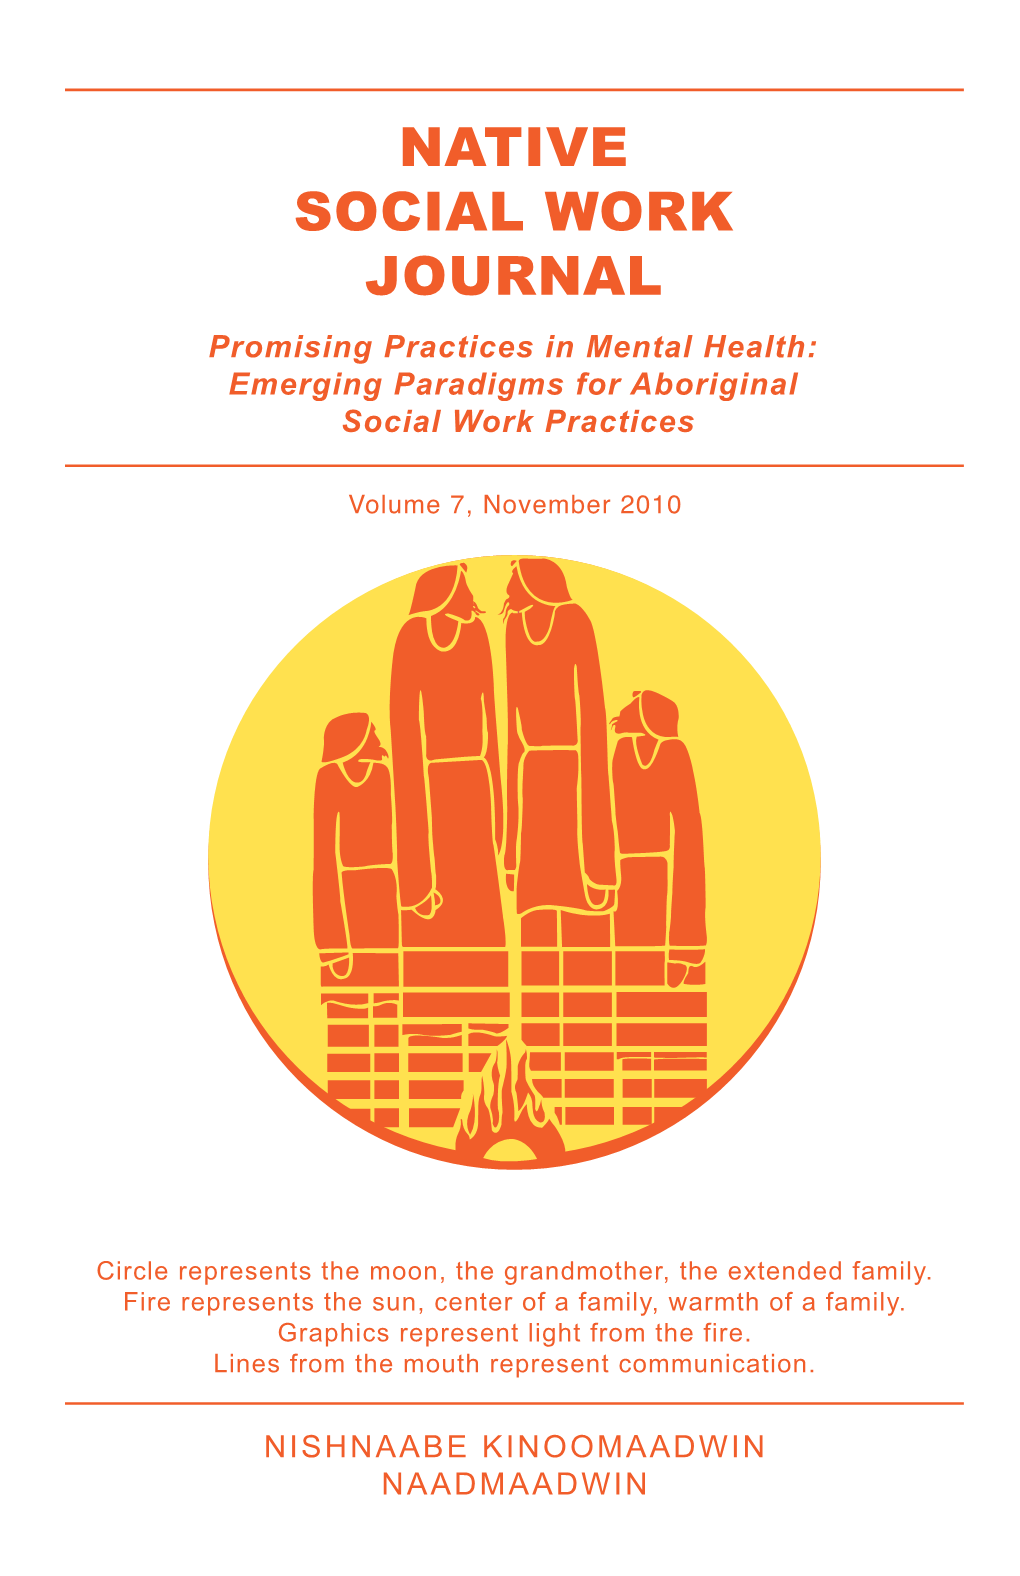 Promising Practices in Mental Health: Emerging Paradigms for Aboriginal Social Work Practices